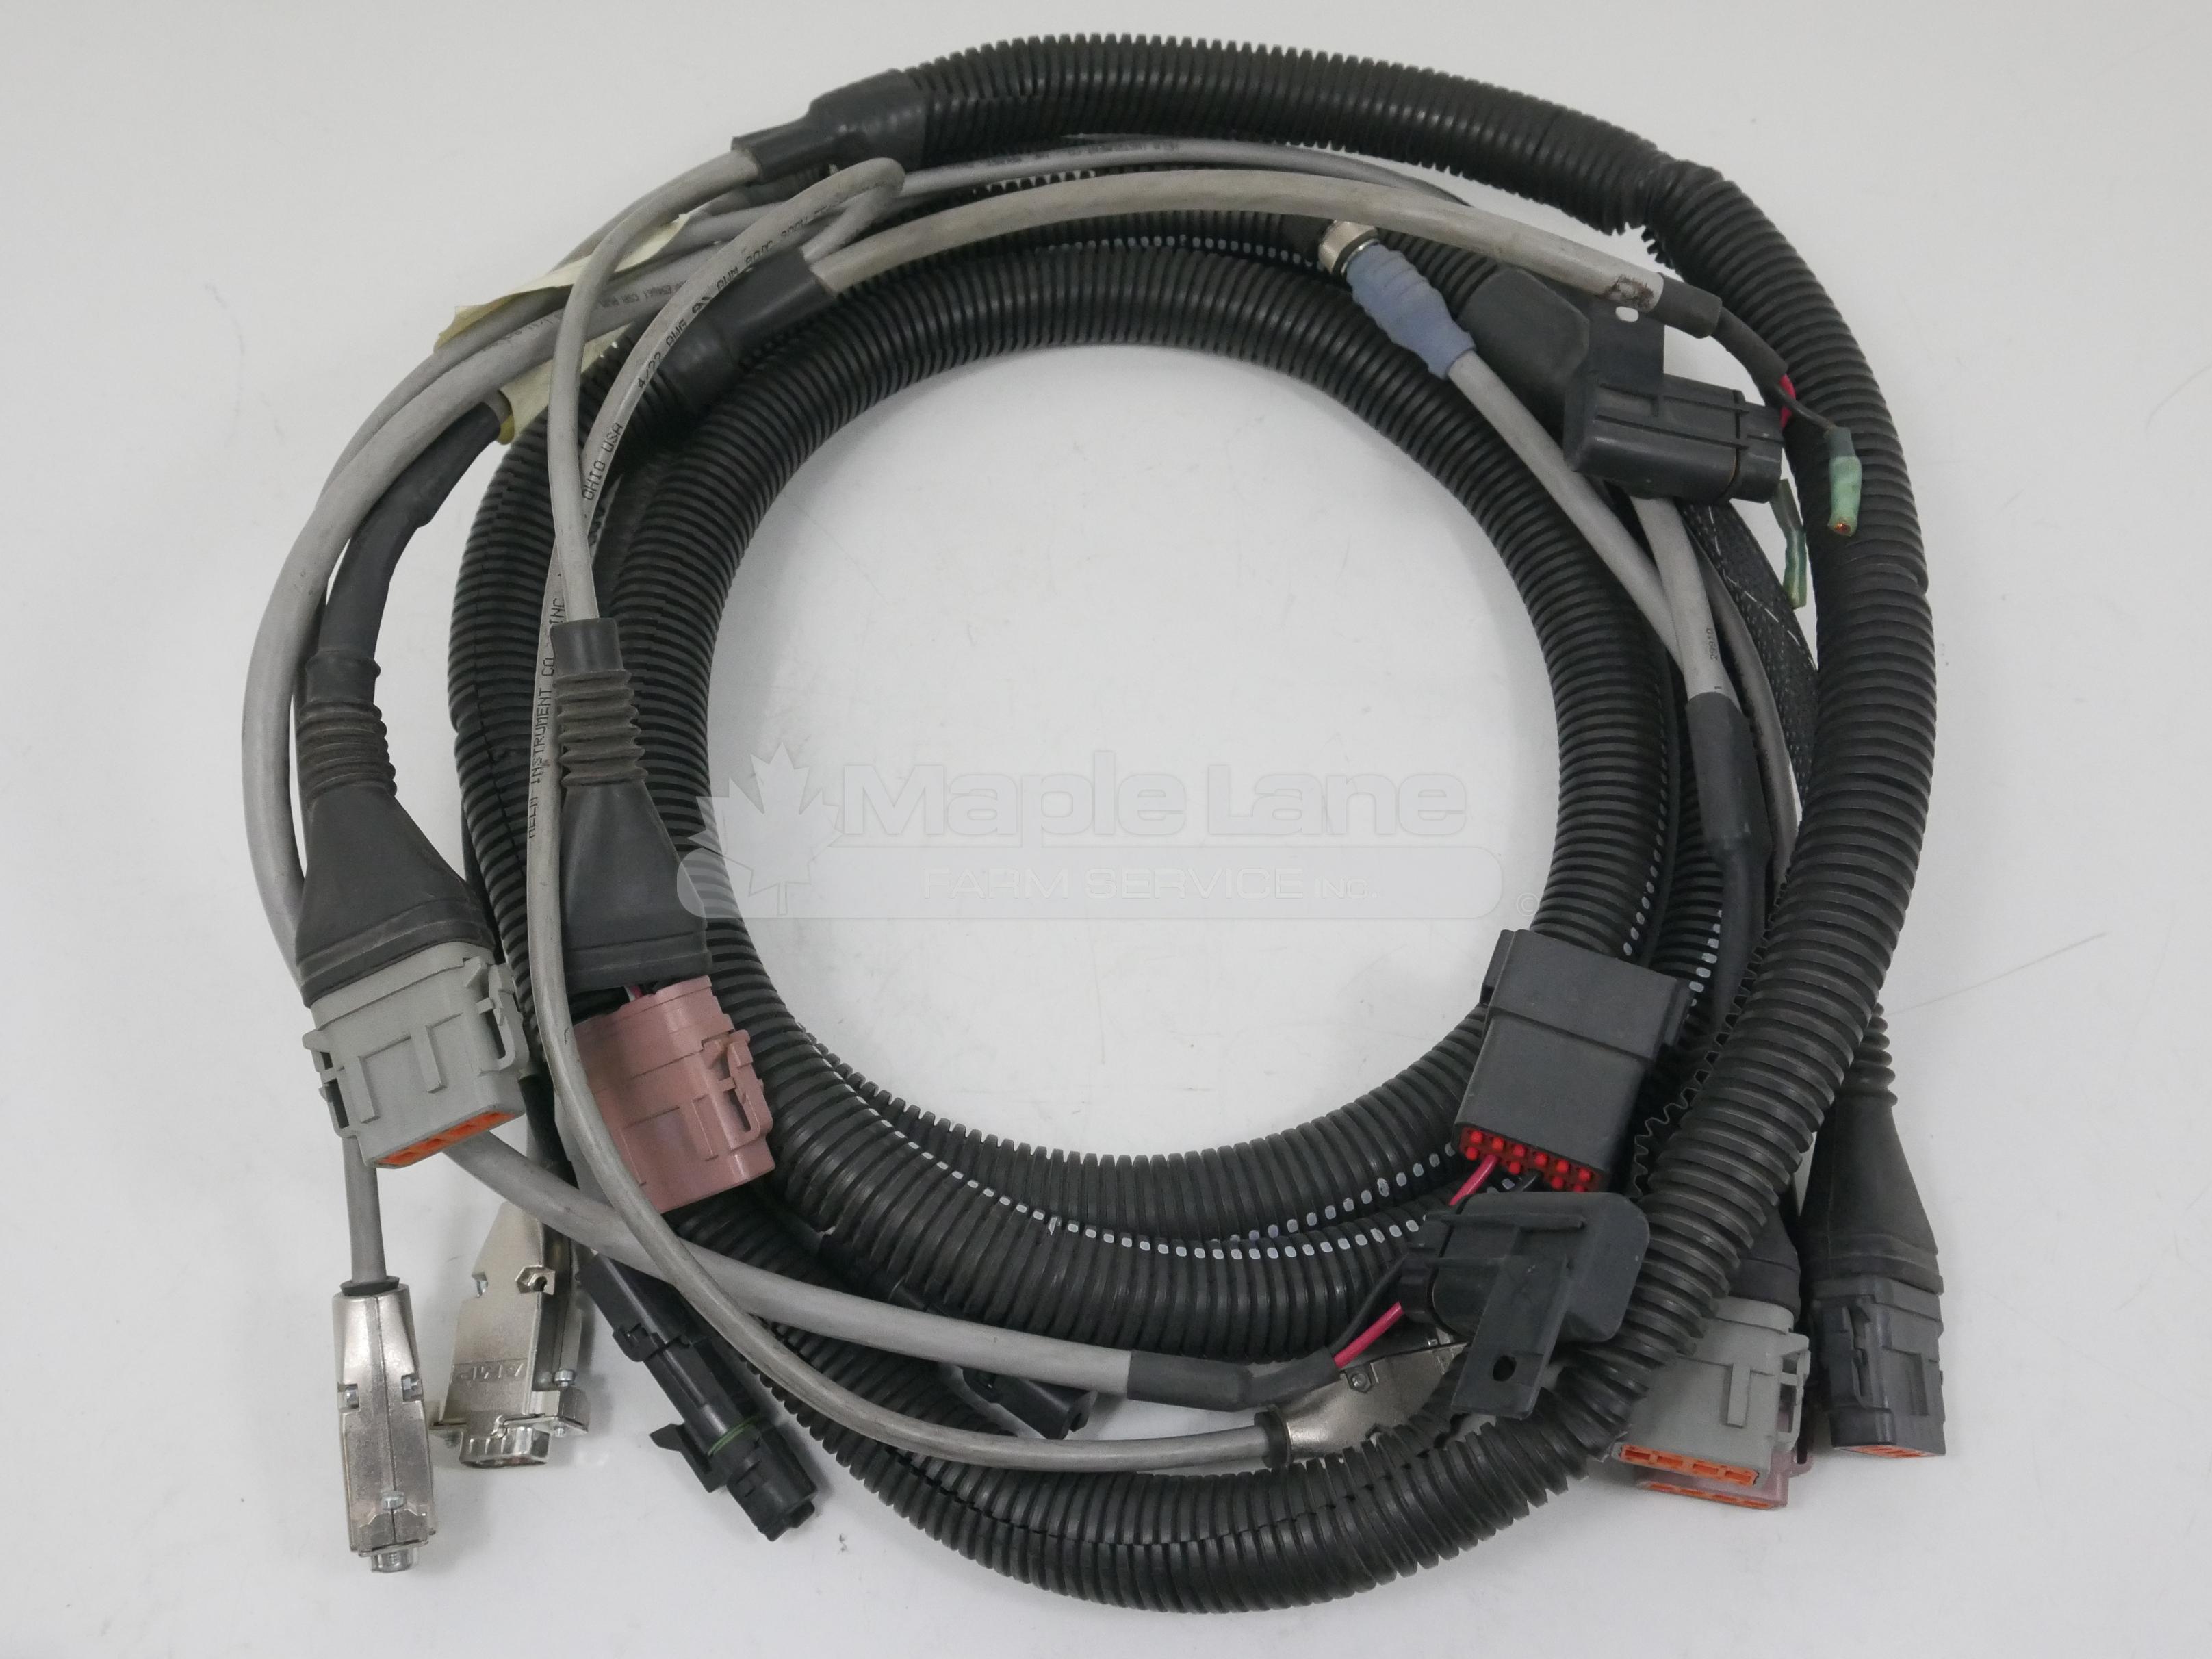 A--0004935 Harness